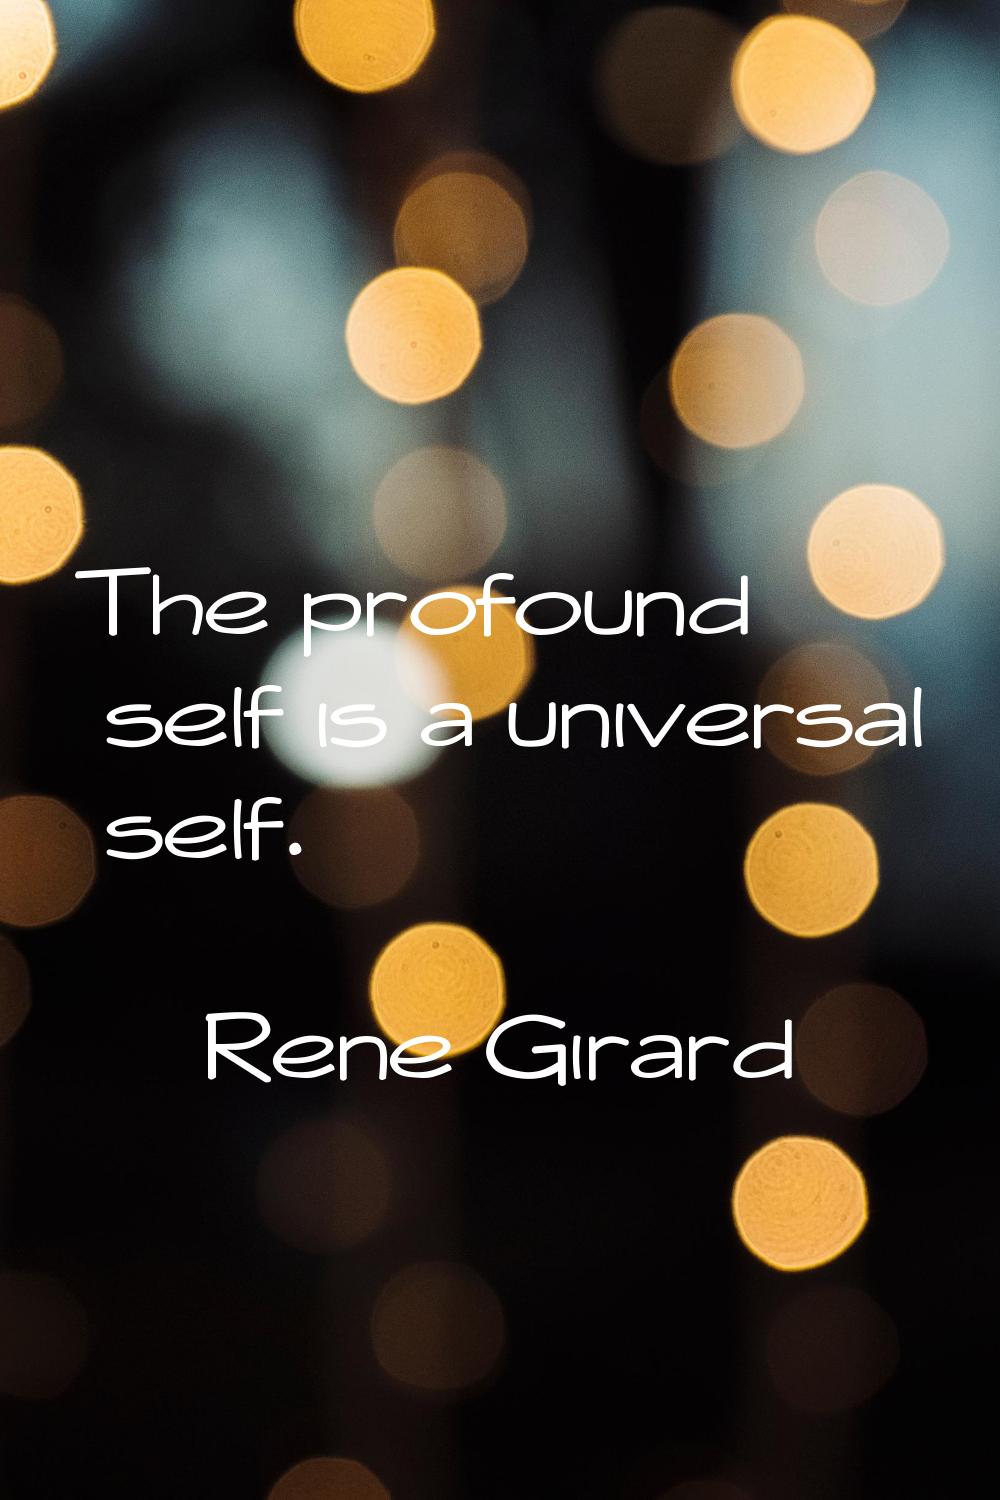 The profound self is a universal self.